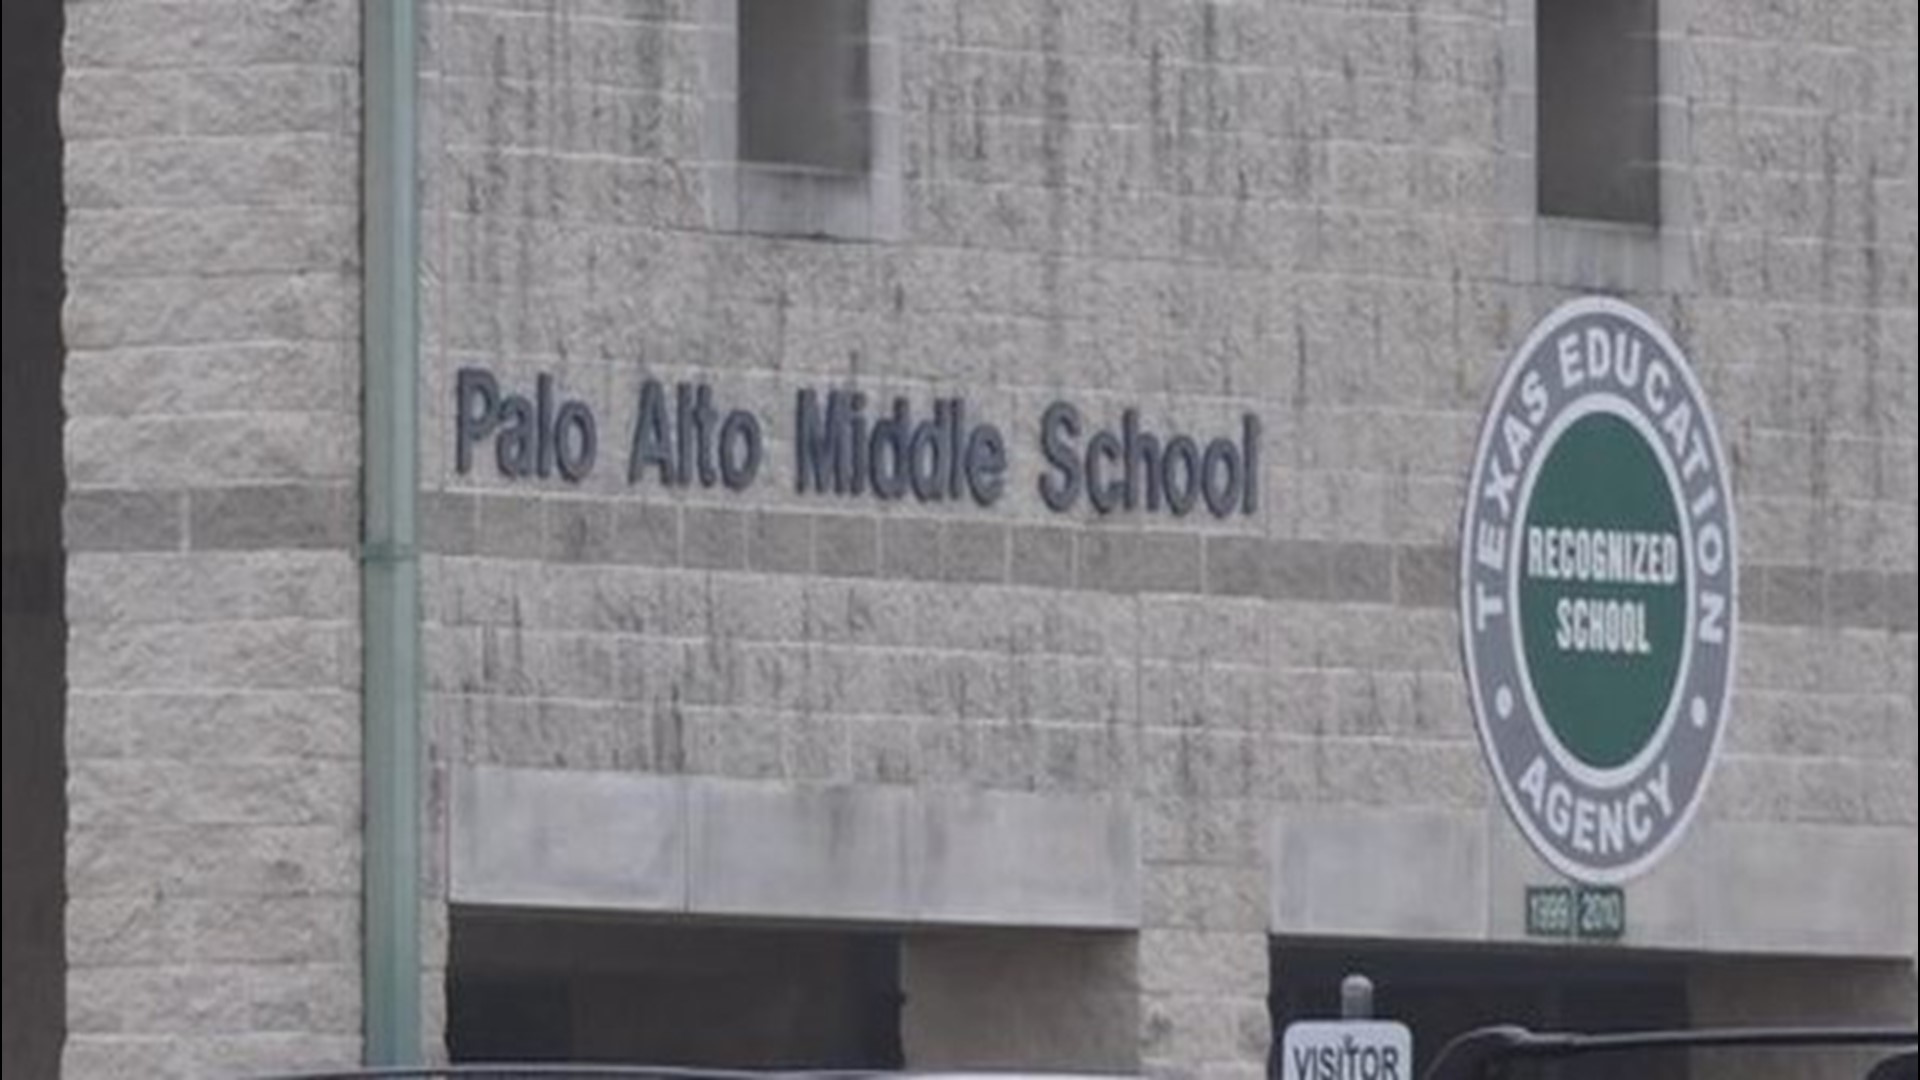 A Killeen mother said she was furious after a secretly recorded video of her son using a restroom at Palo Alto Middle School was posted to Instagram.